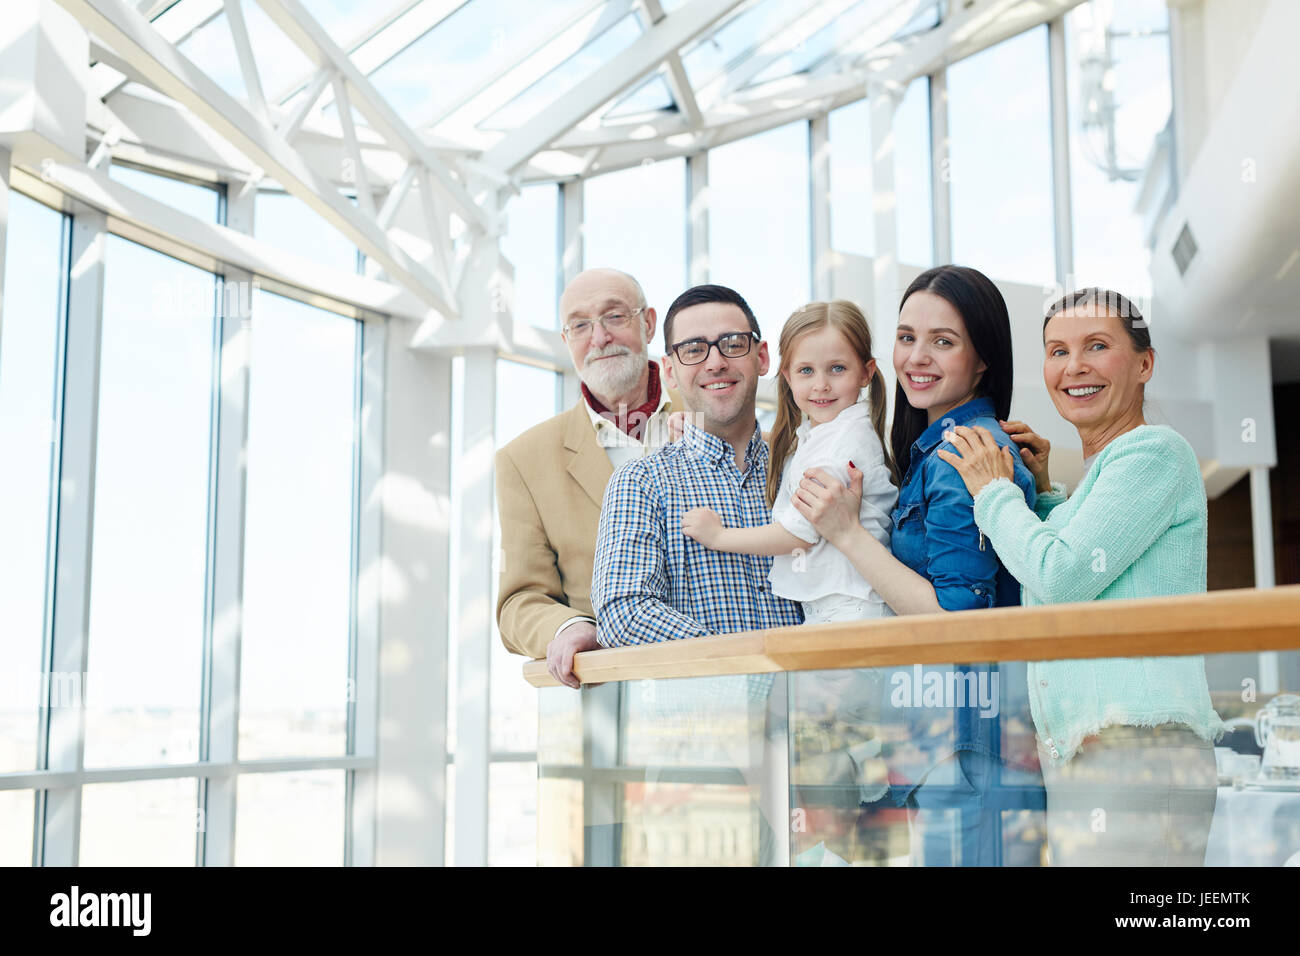 Happy big family of little girl, young and senior couples looking at camera Stock Photo